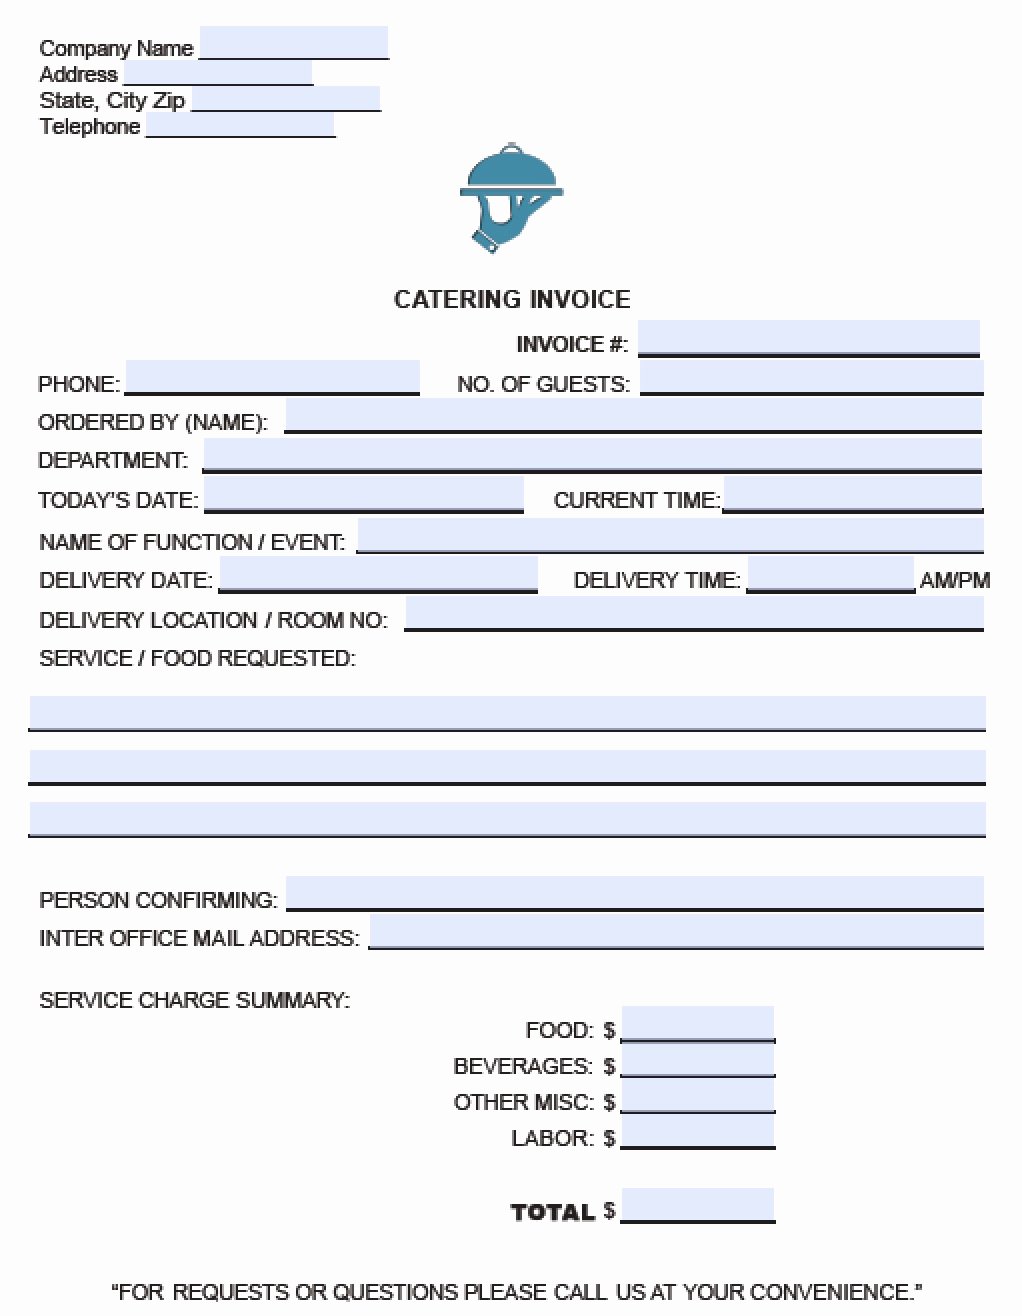 Free Catering Invoice Template Awesome Free Catering Service Invoice Template Excel